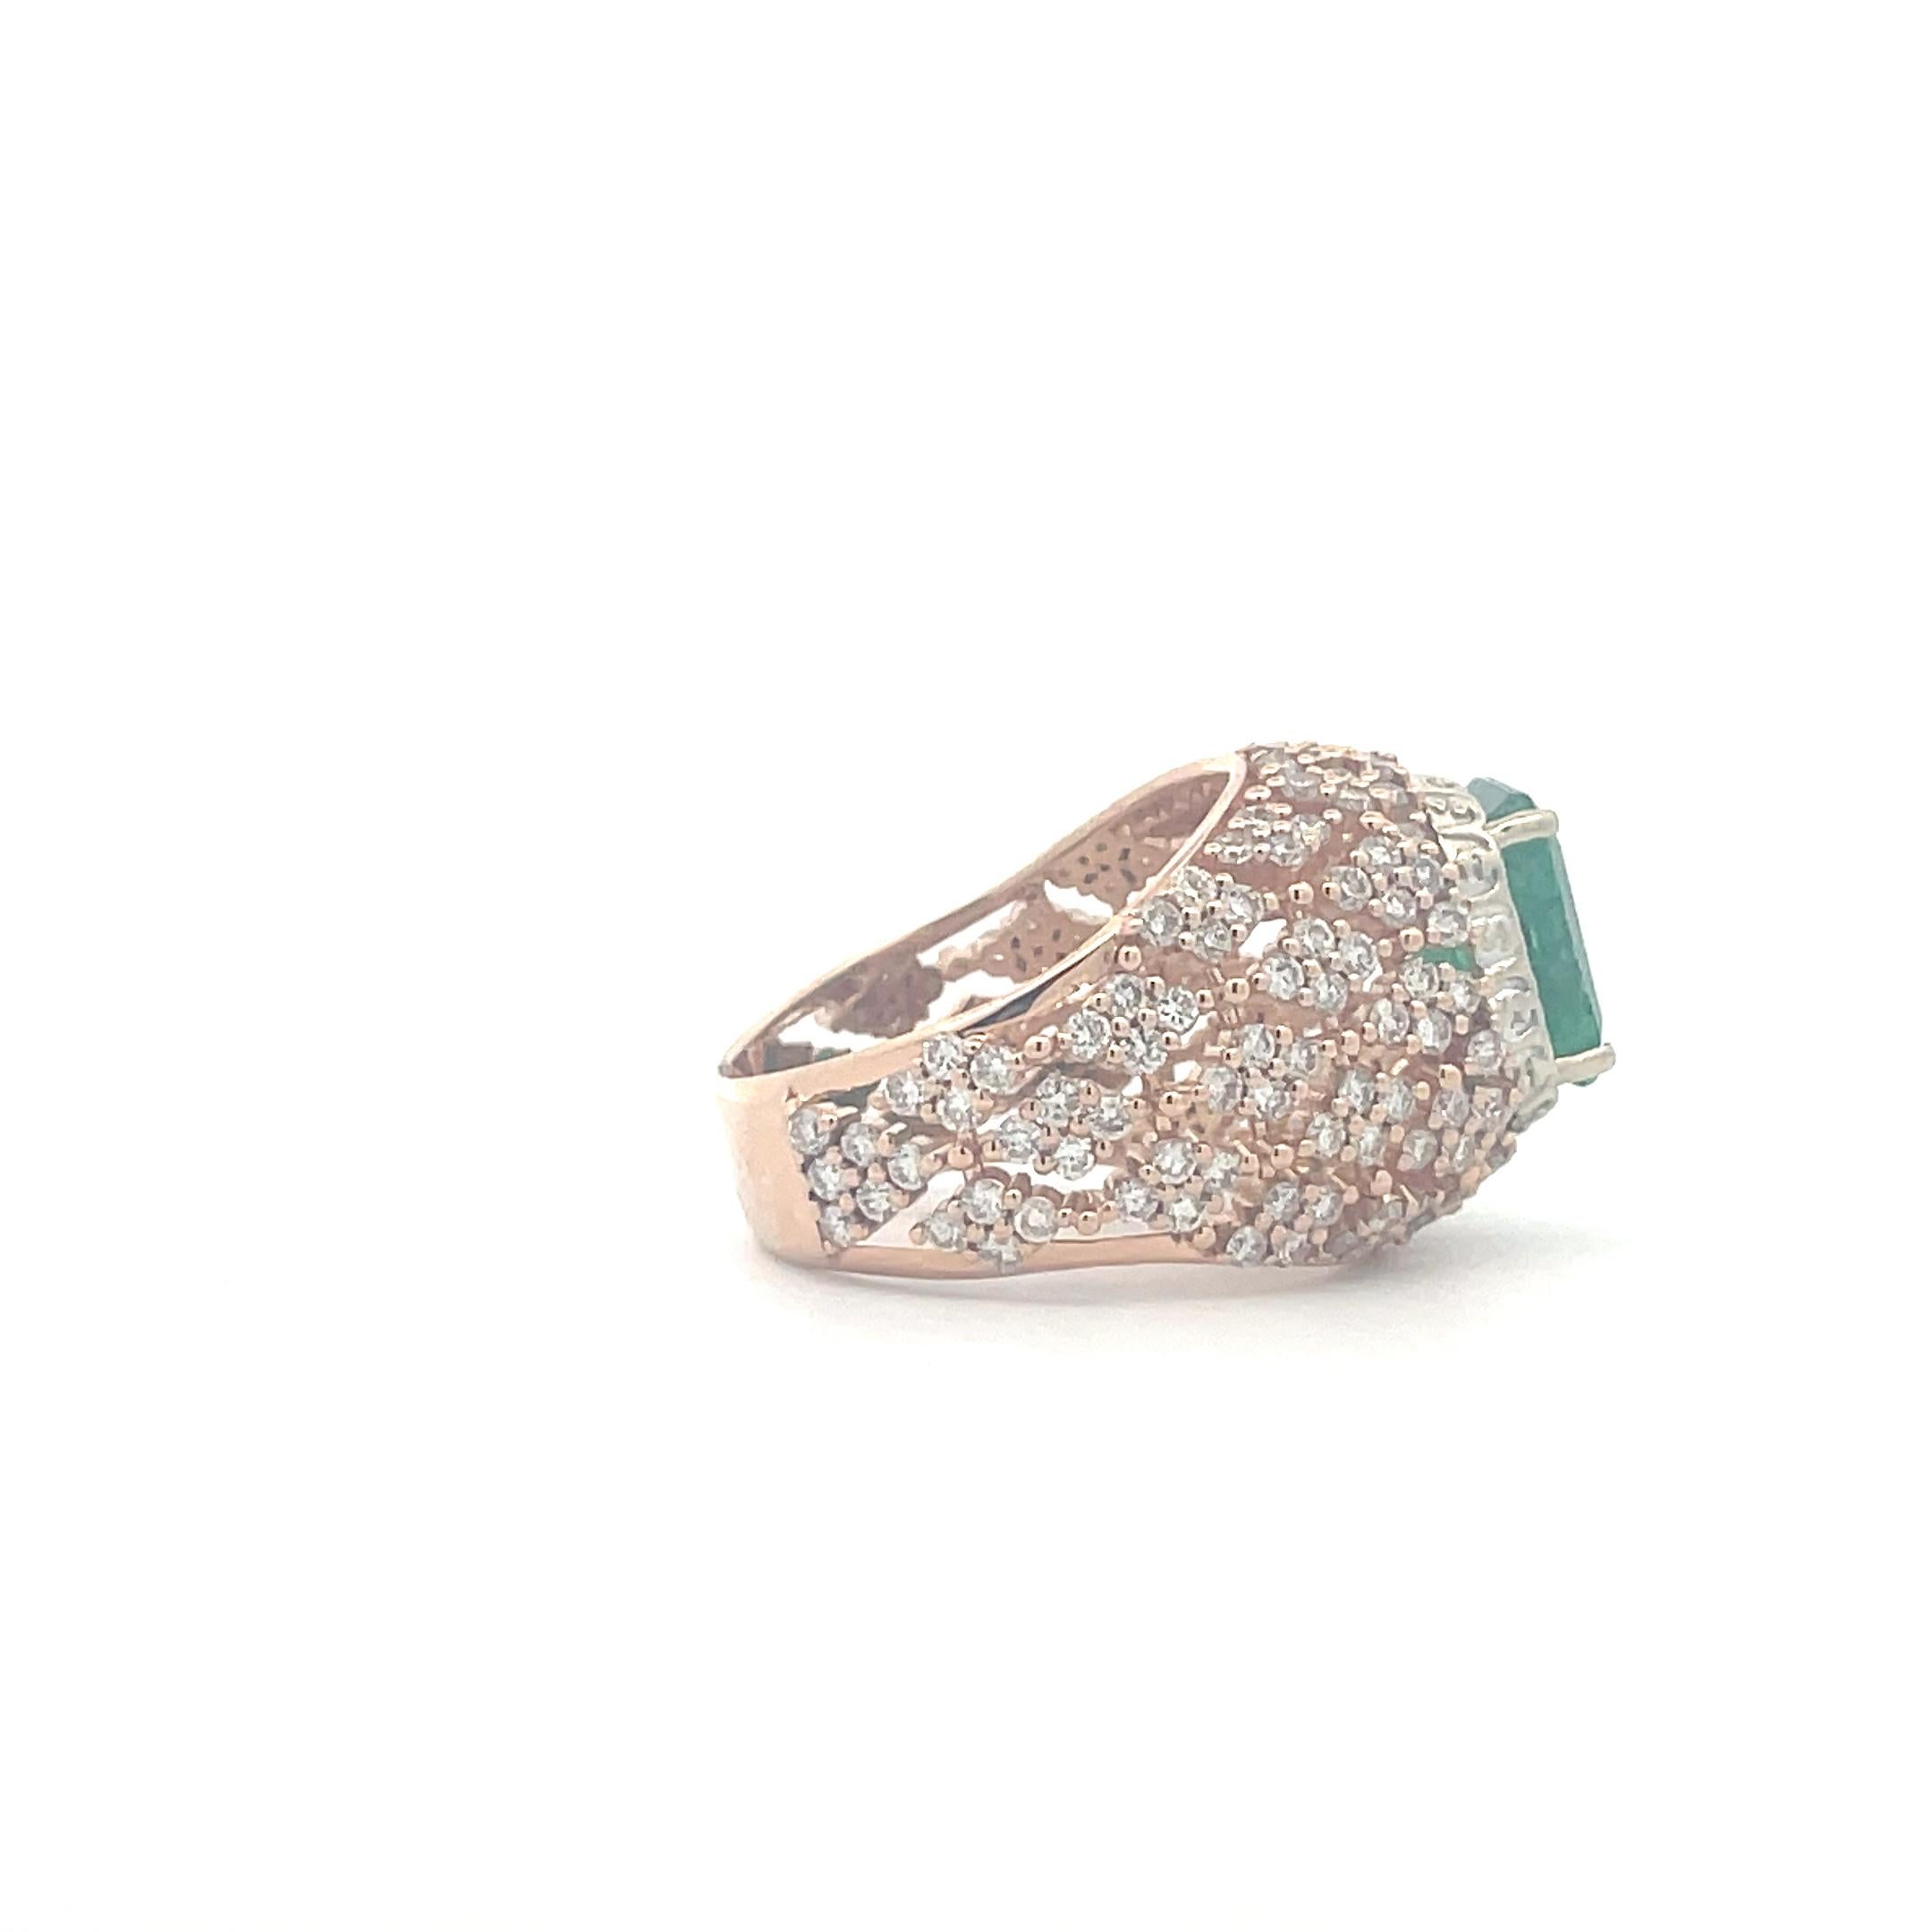 Emerald Cut 3.18 Ct. Emerald Diamond Cluster Hollow Cocktail Statement Ring in 14K Gold